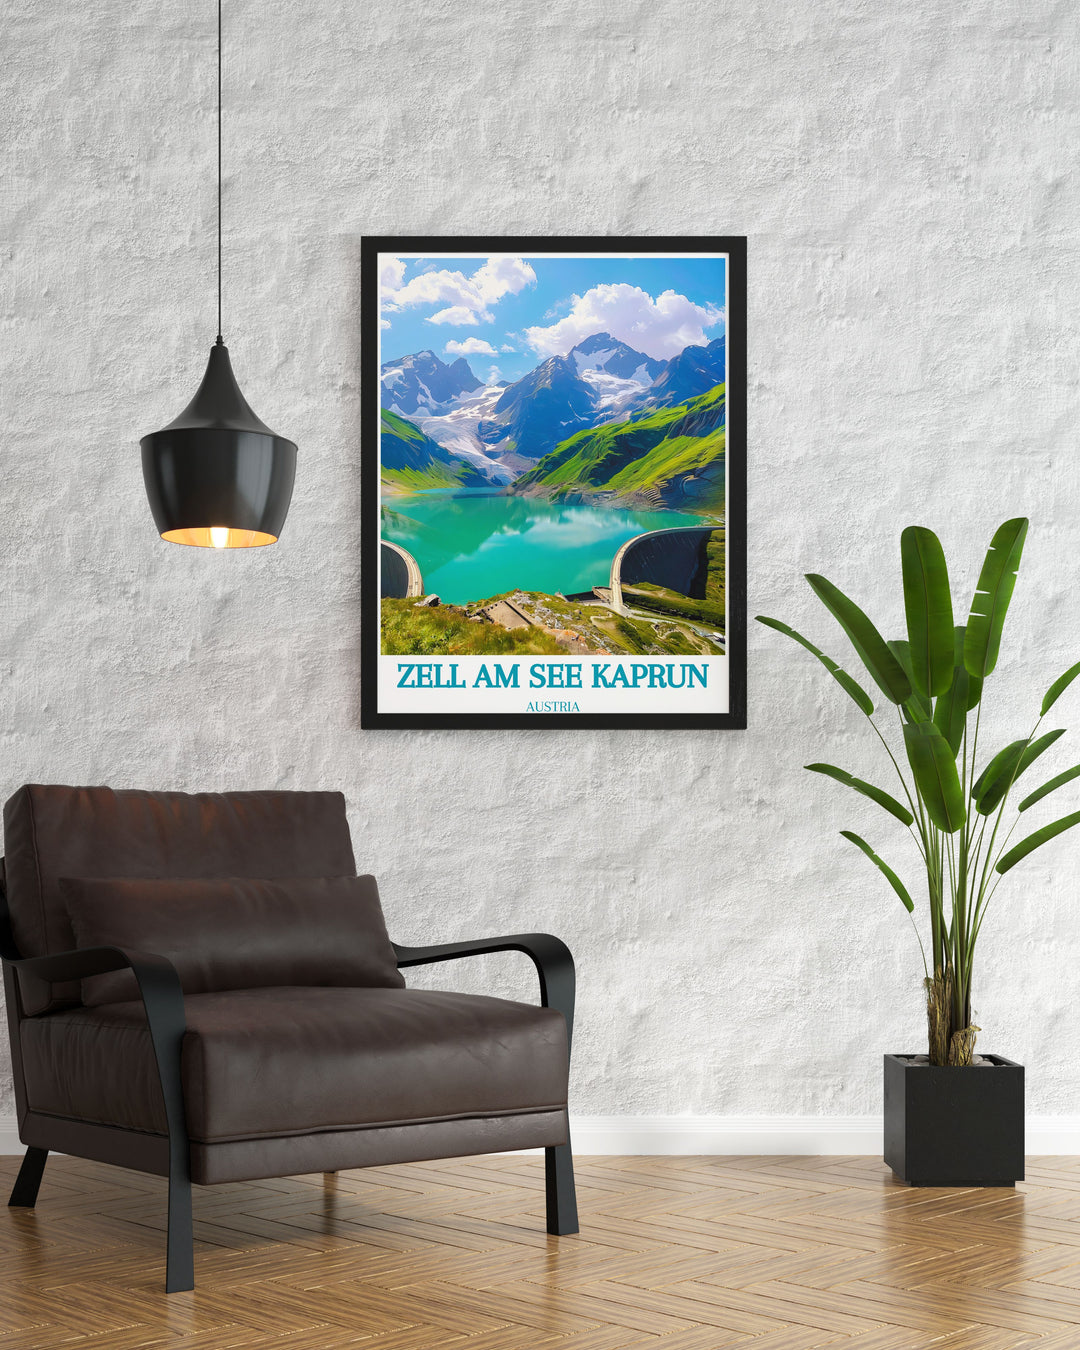 Timeless framed art depicting the scenic landscapes of Zell am See Kaprun. The artwork highlights the regions snow capped peaks, tranquil lake, and vibrant village, offering a perfect blend of adventure and serenity, making it a beautiful addition to any home.